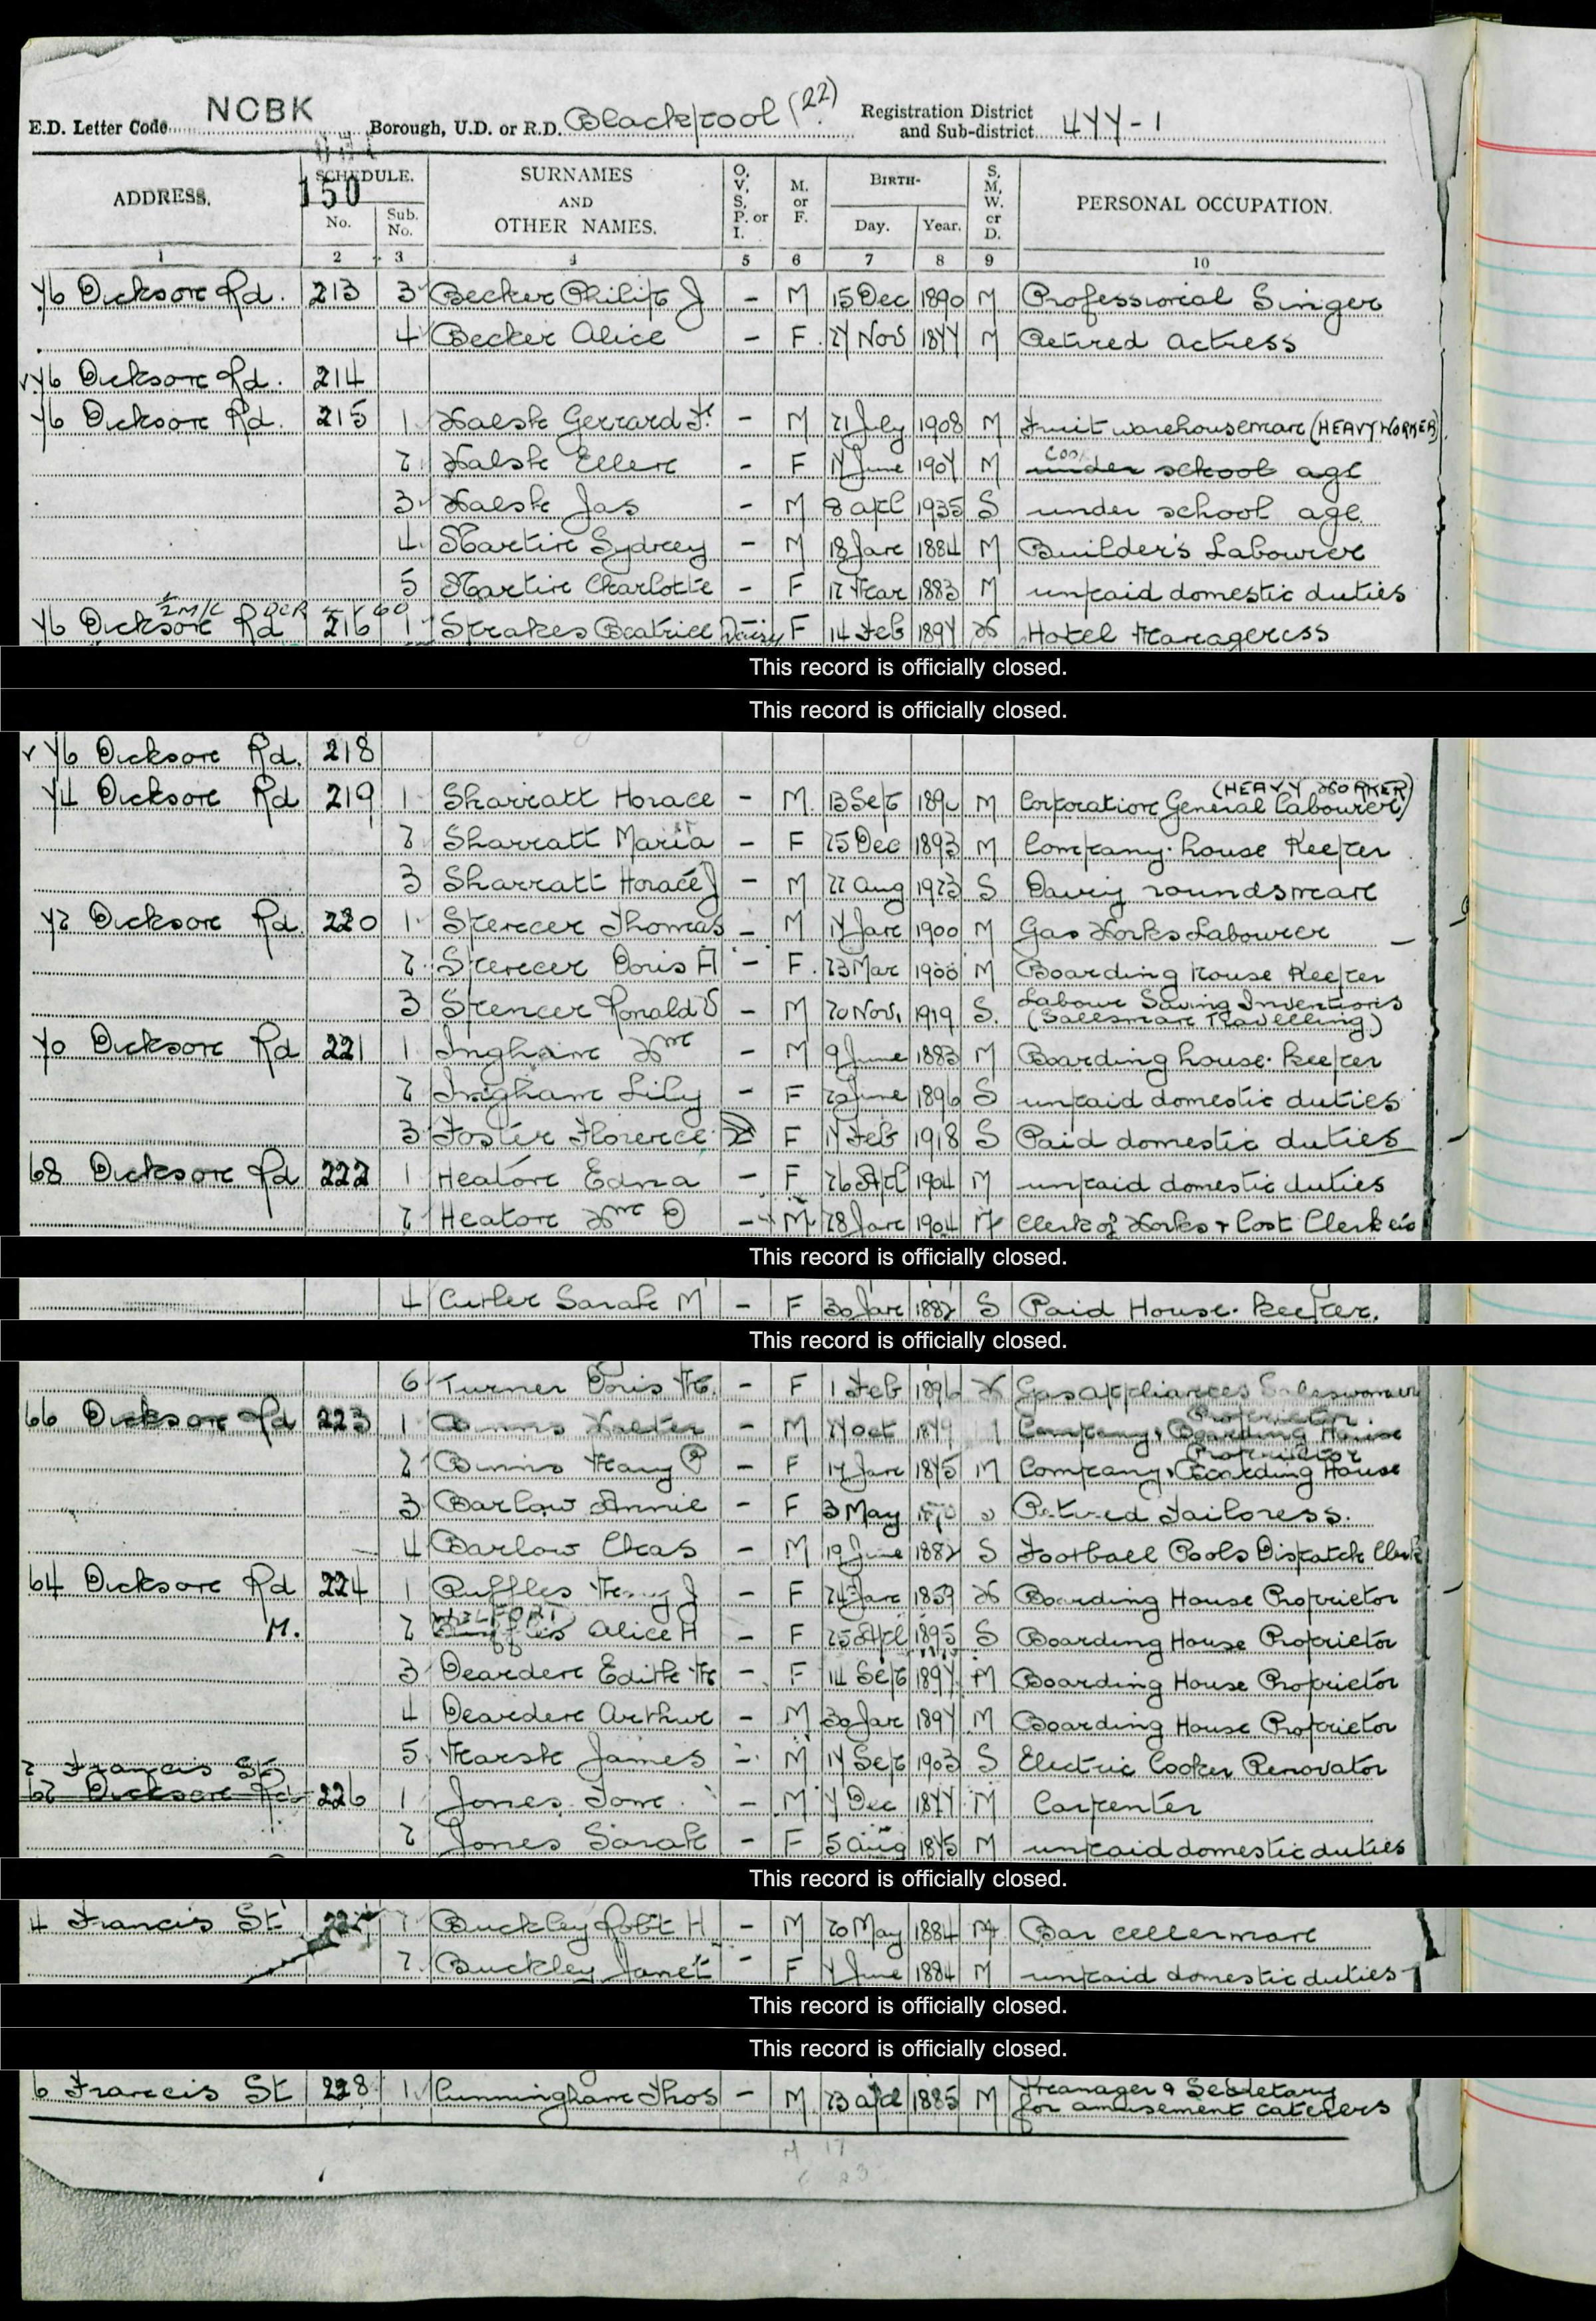 Philip Becker in the 1949 Register (at the top)